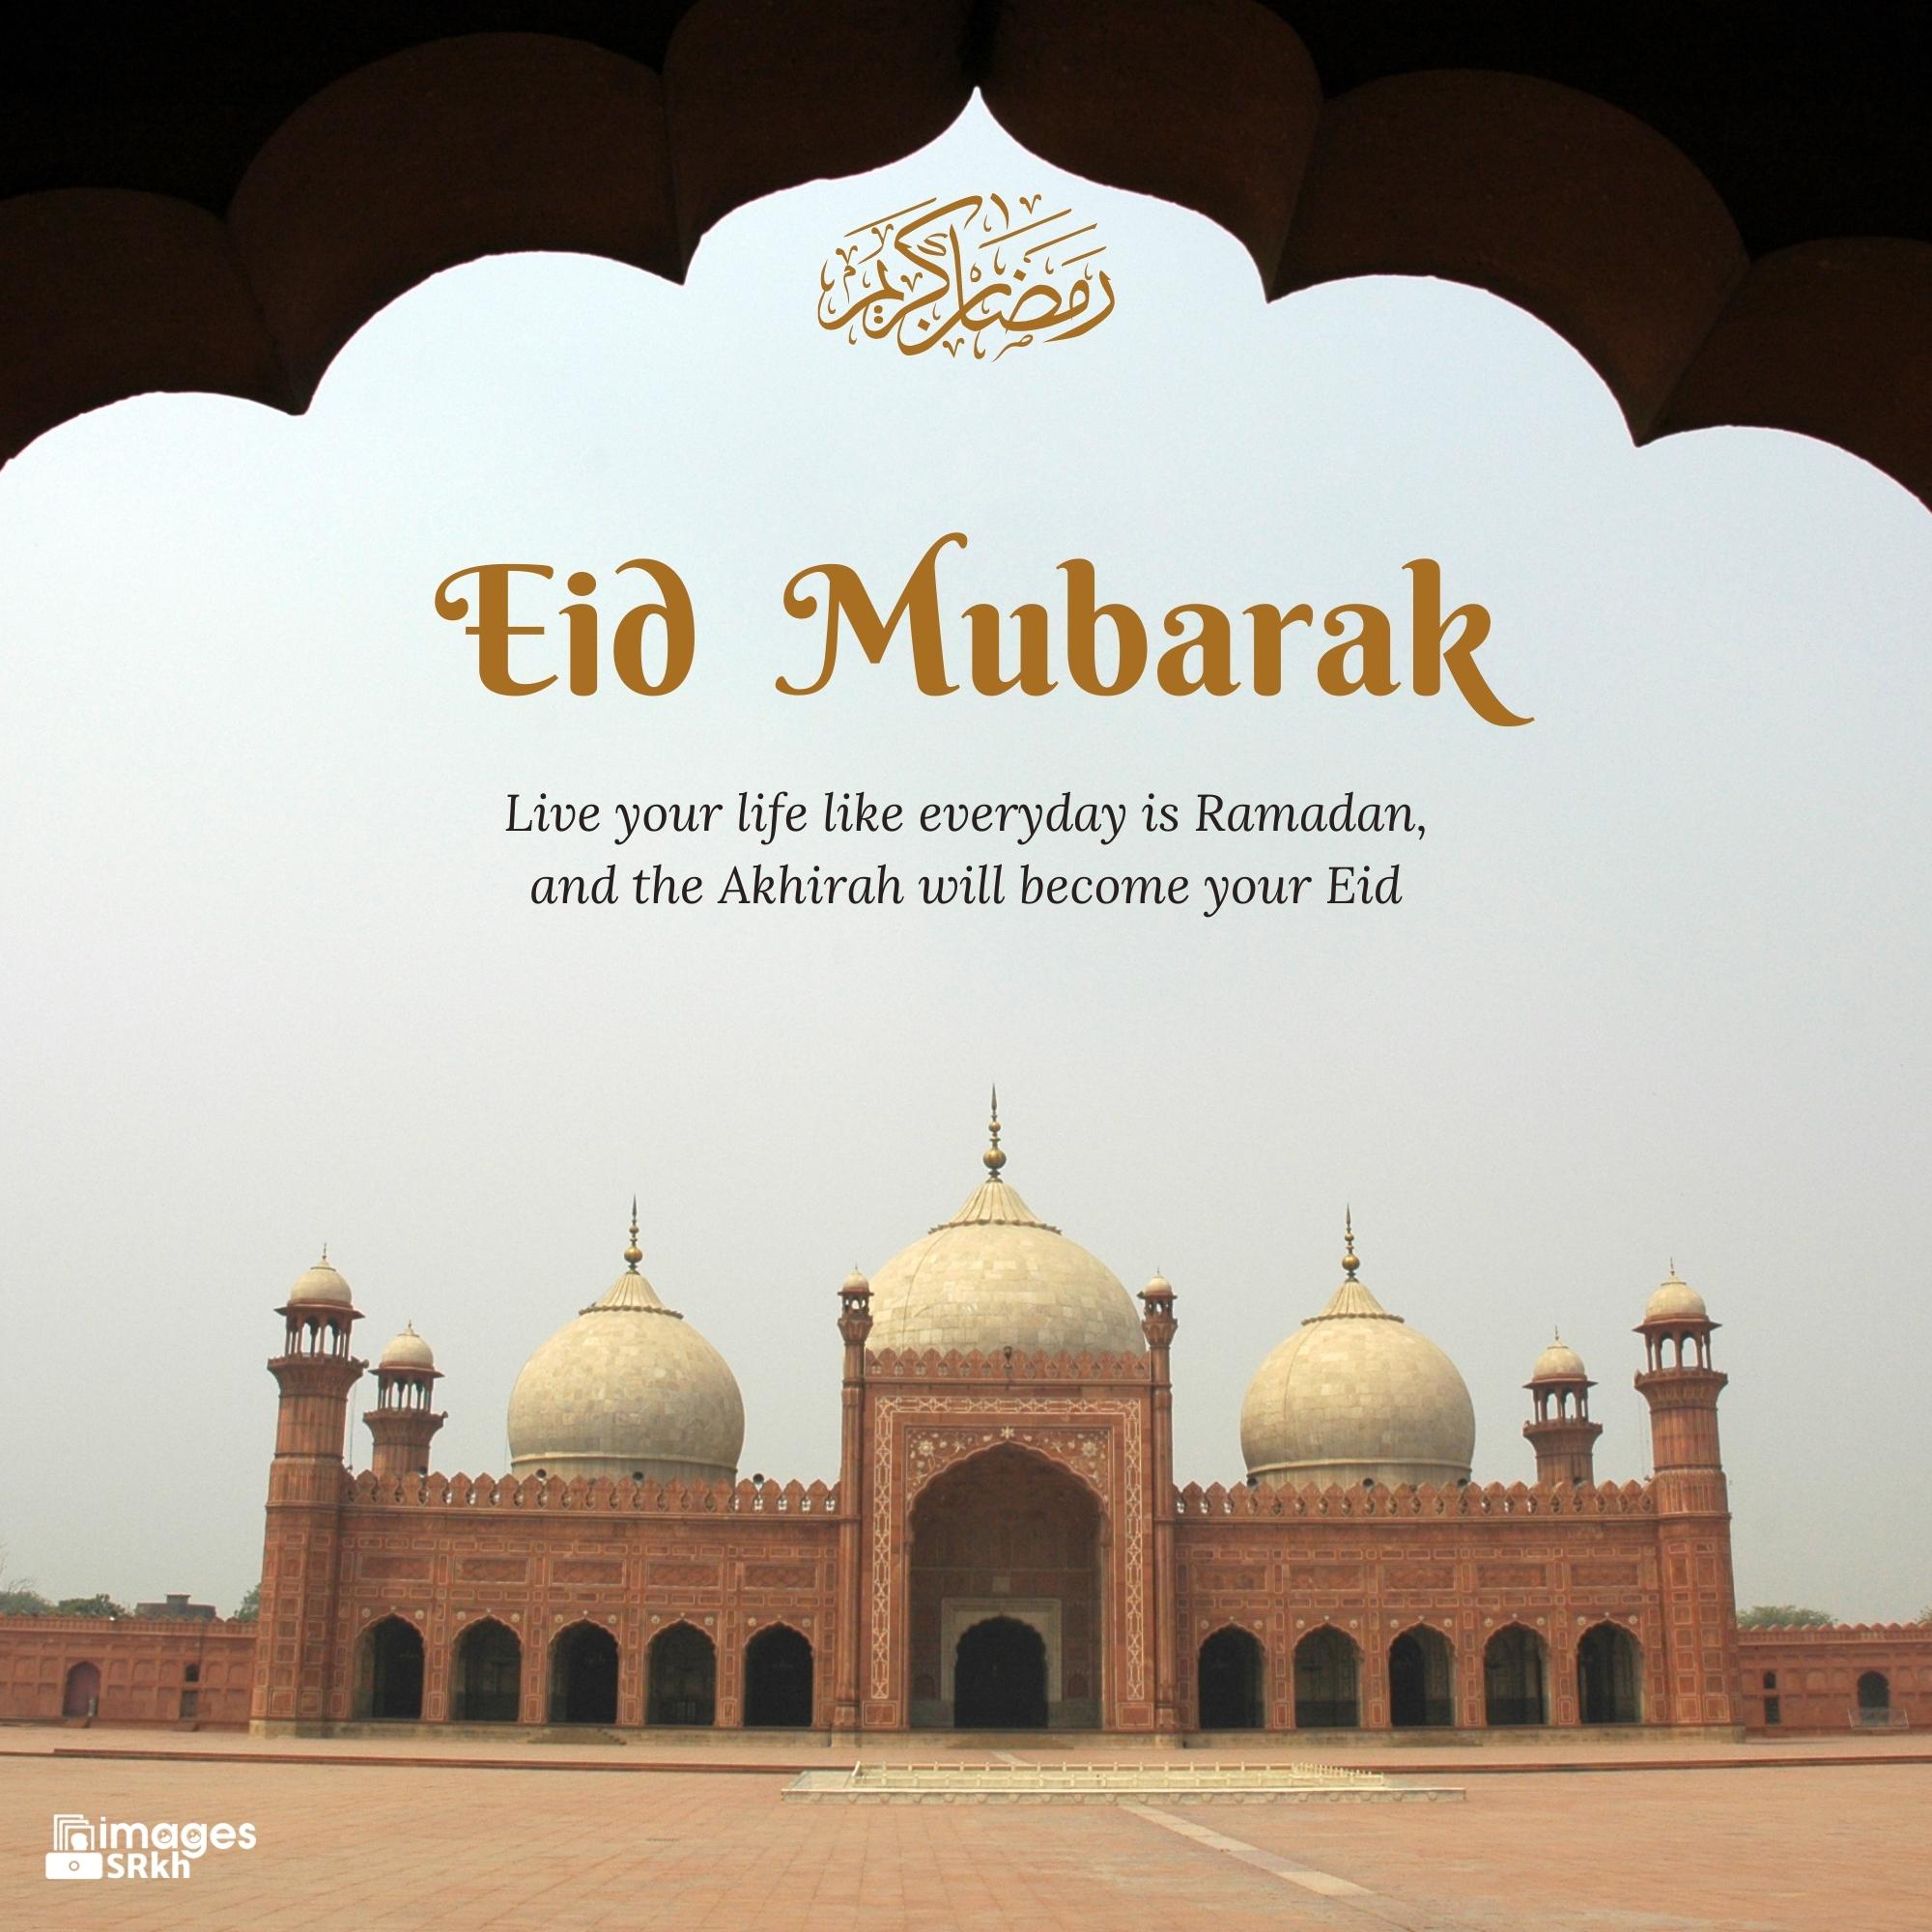 Quotes For Eid Mubarak (4) | Download free in Hd Quality | imagesSRkh